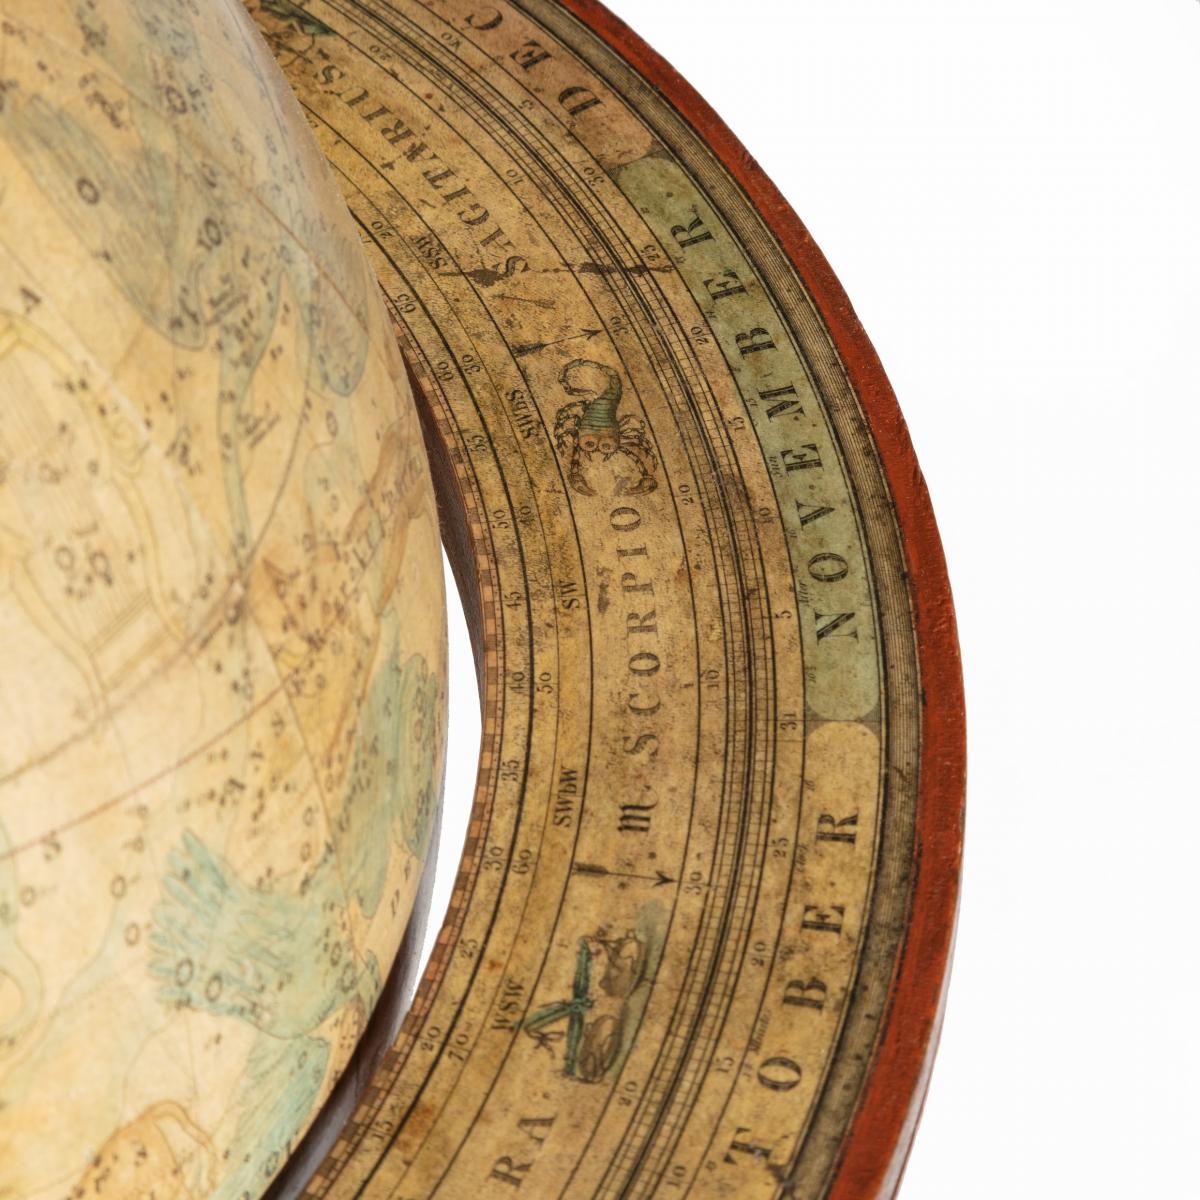 A pair of 12 inch table globes by Josiah Loring, dated 1844 and 1841